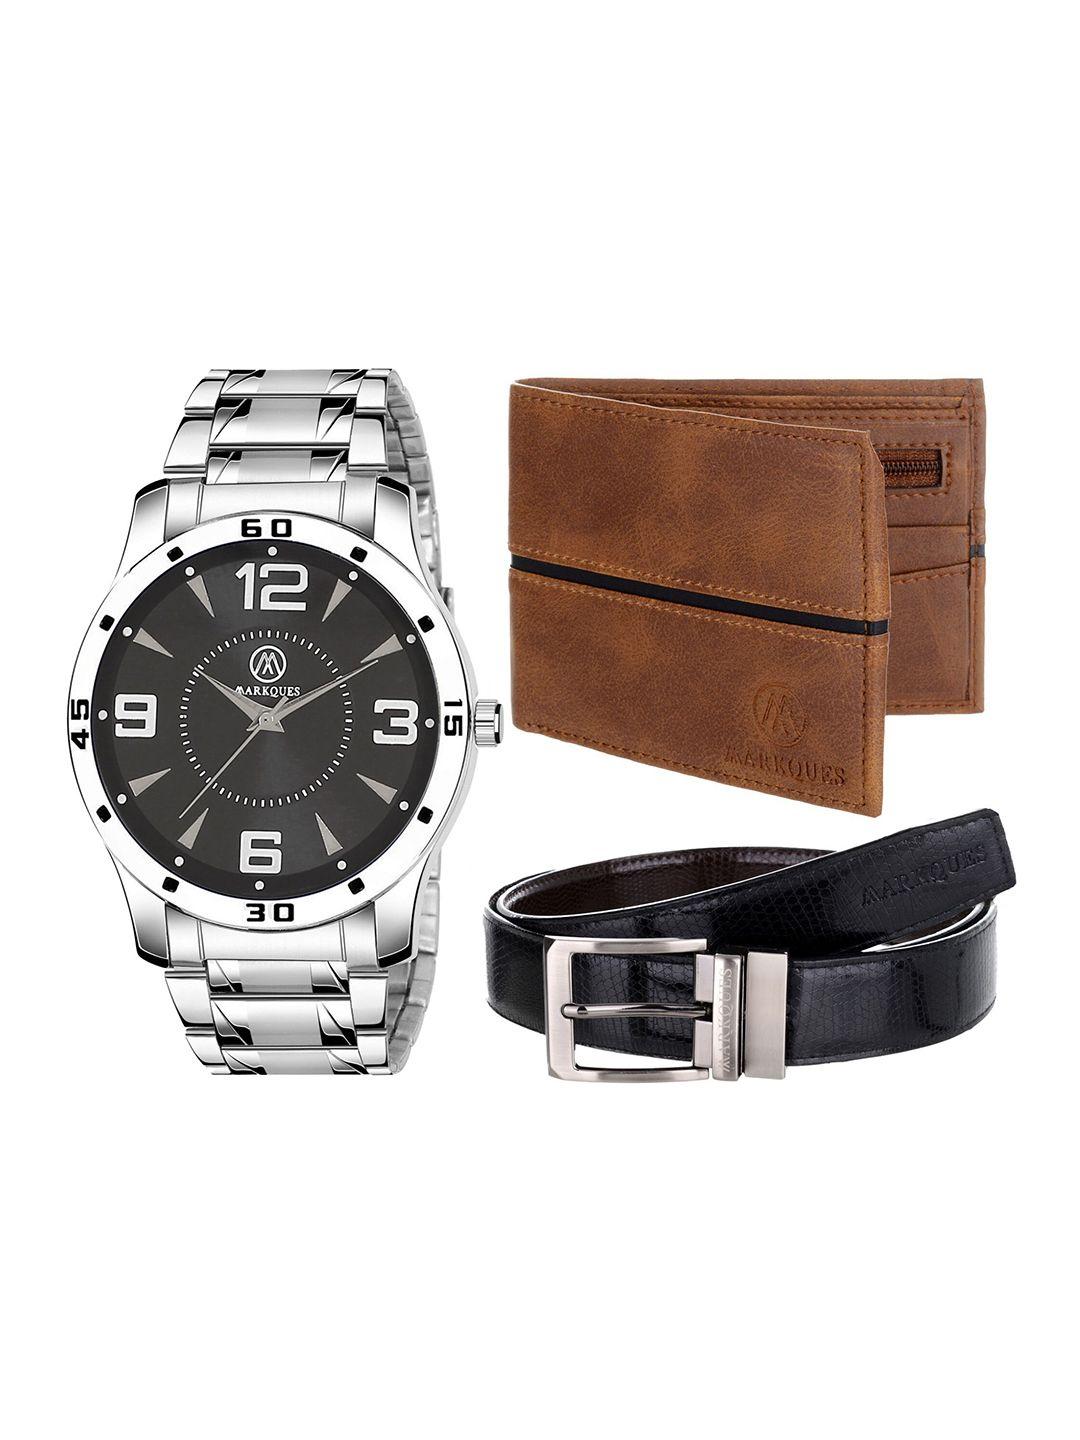 markques men brown & silver-toned leather accessory gift set